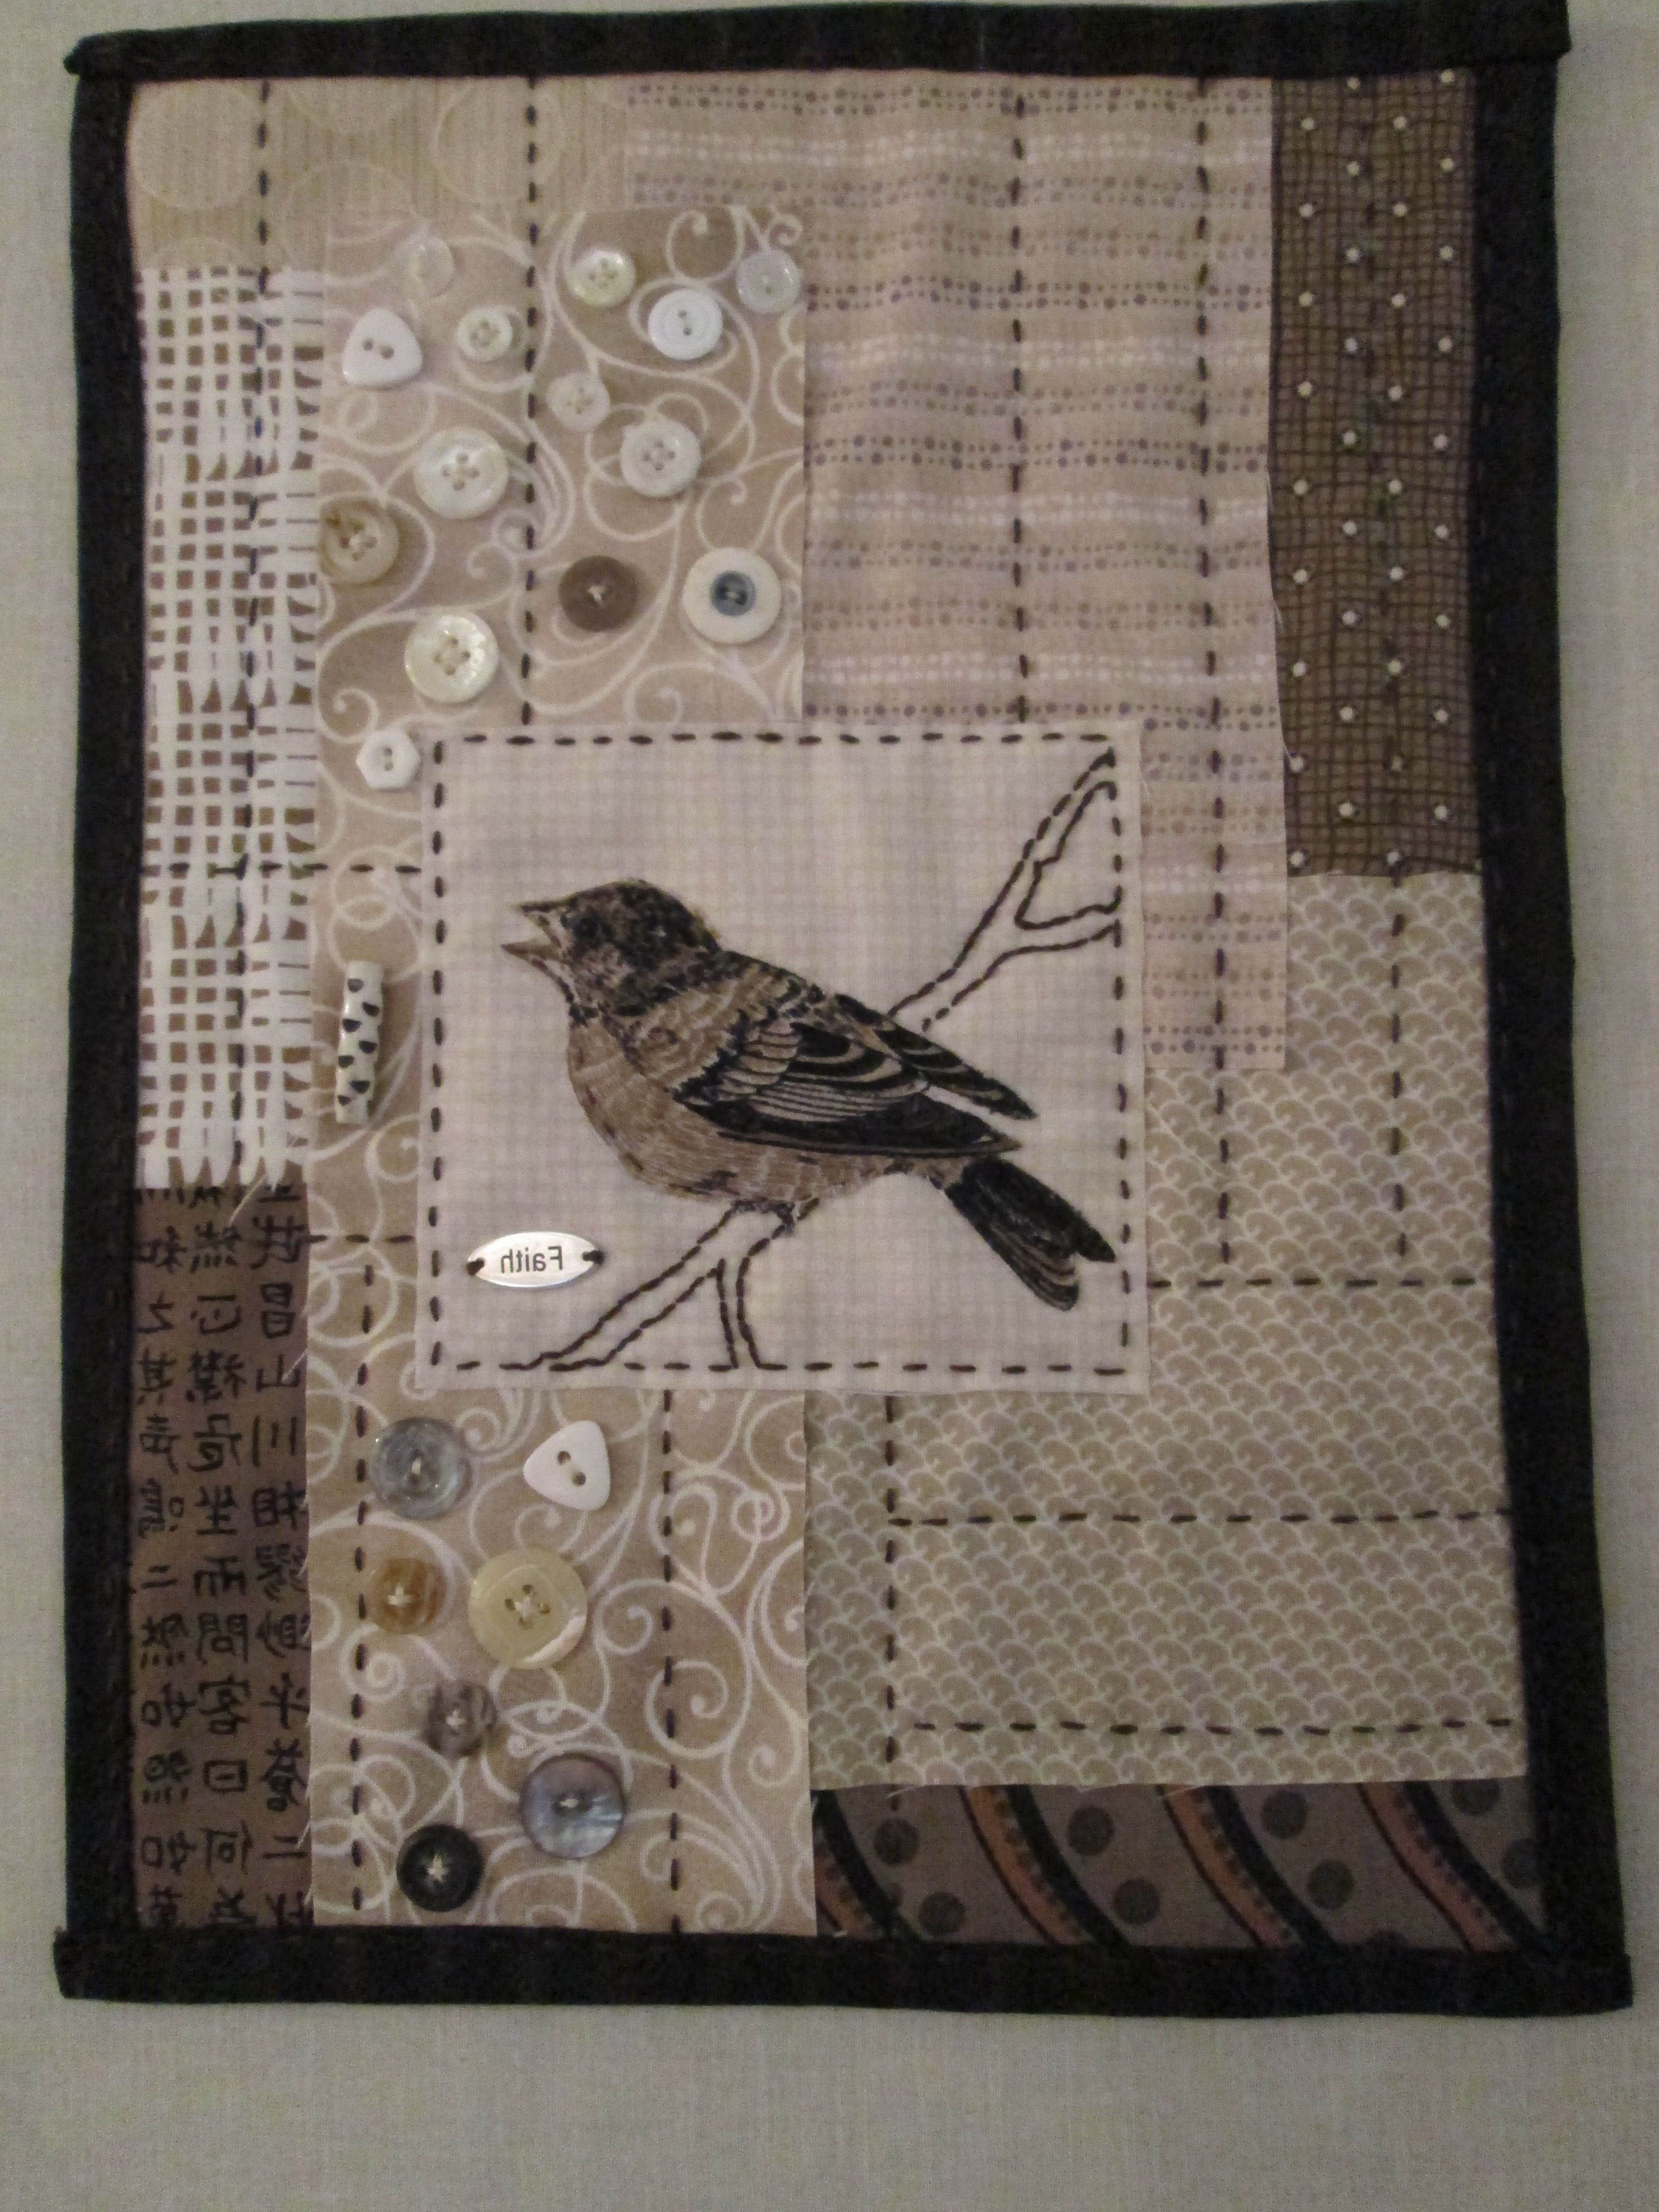 2018 Simple Fabric Wall Art Inside Rmm Quilt: Bird Wall Hanging, Simply Made Using Mixed Techniques (View 14 of 15)